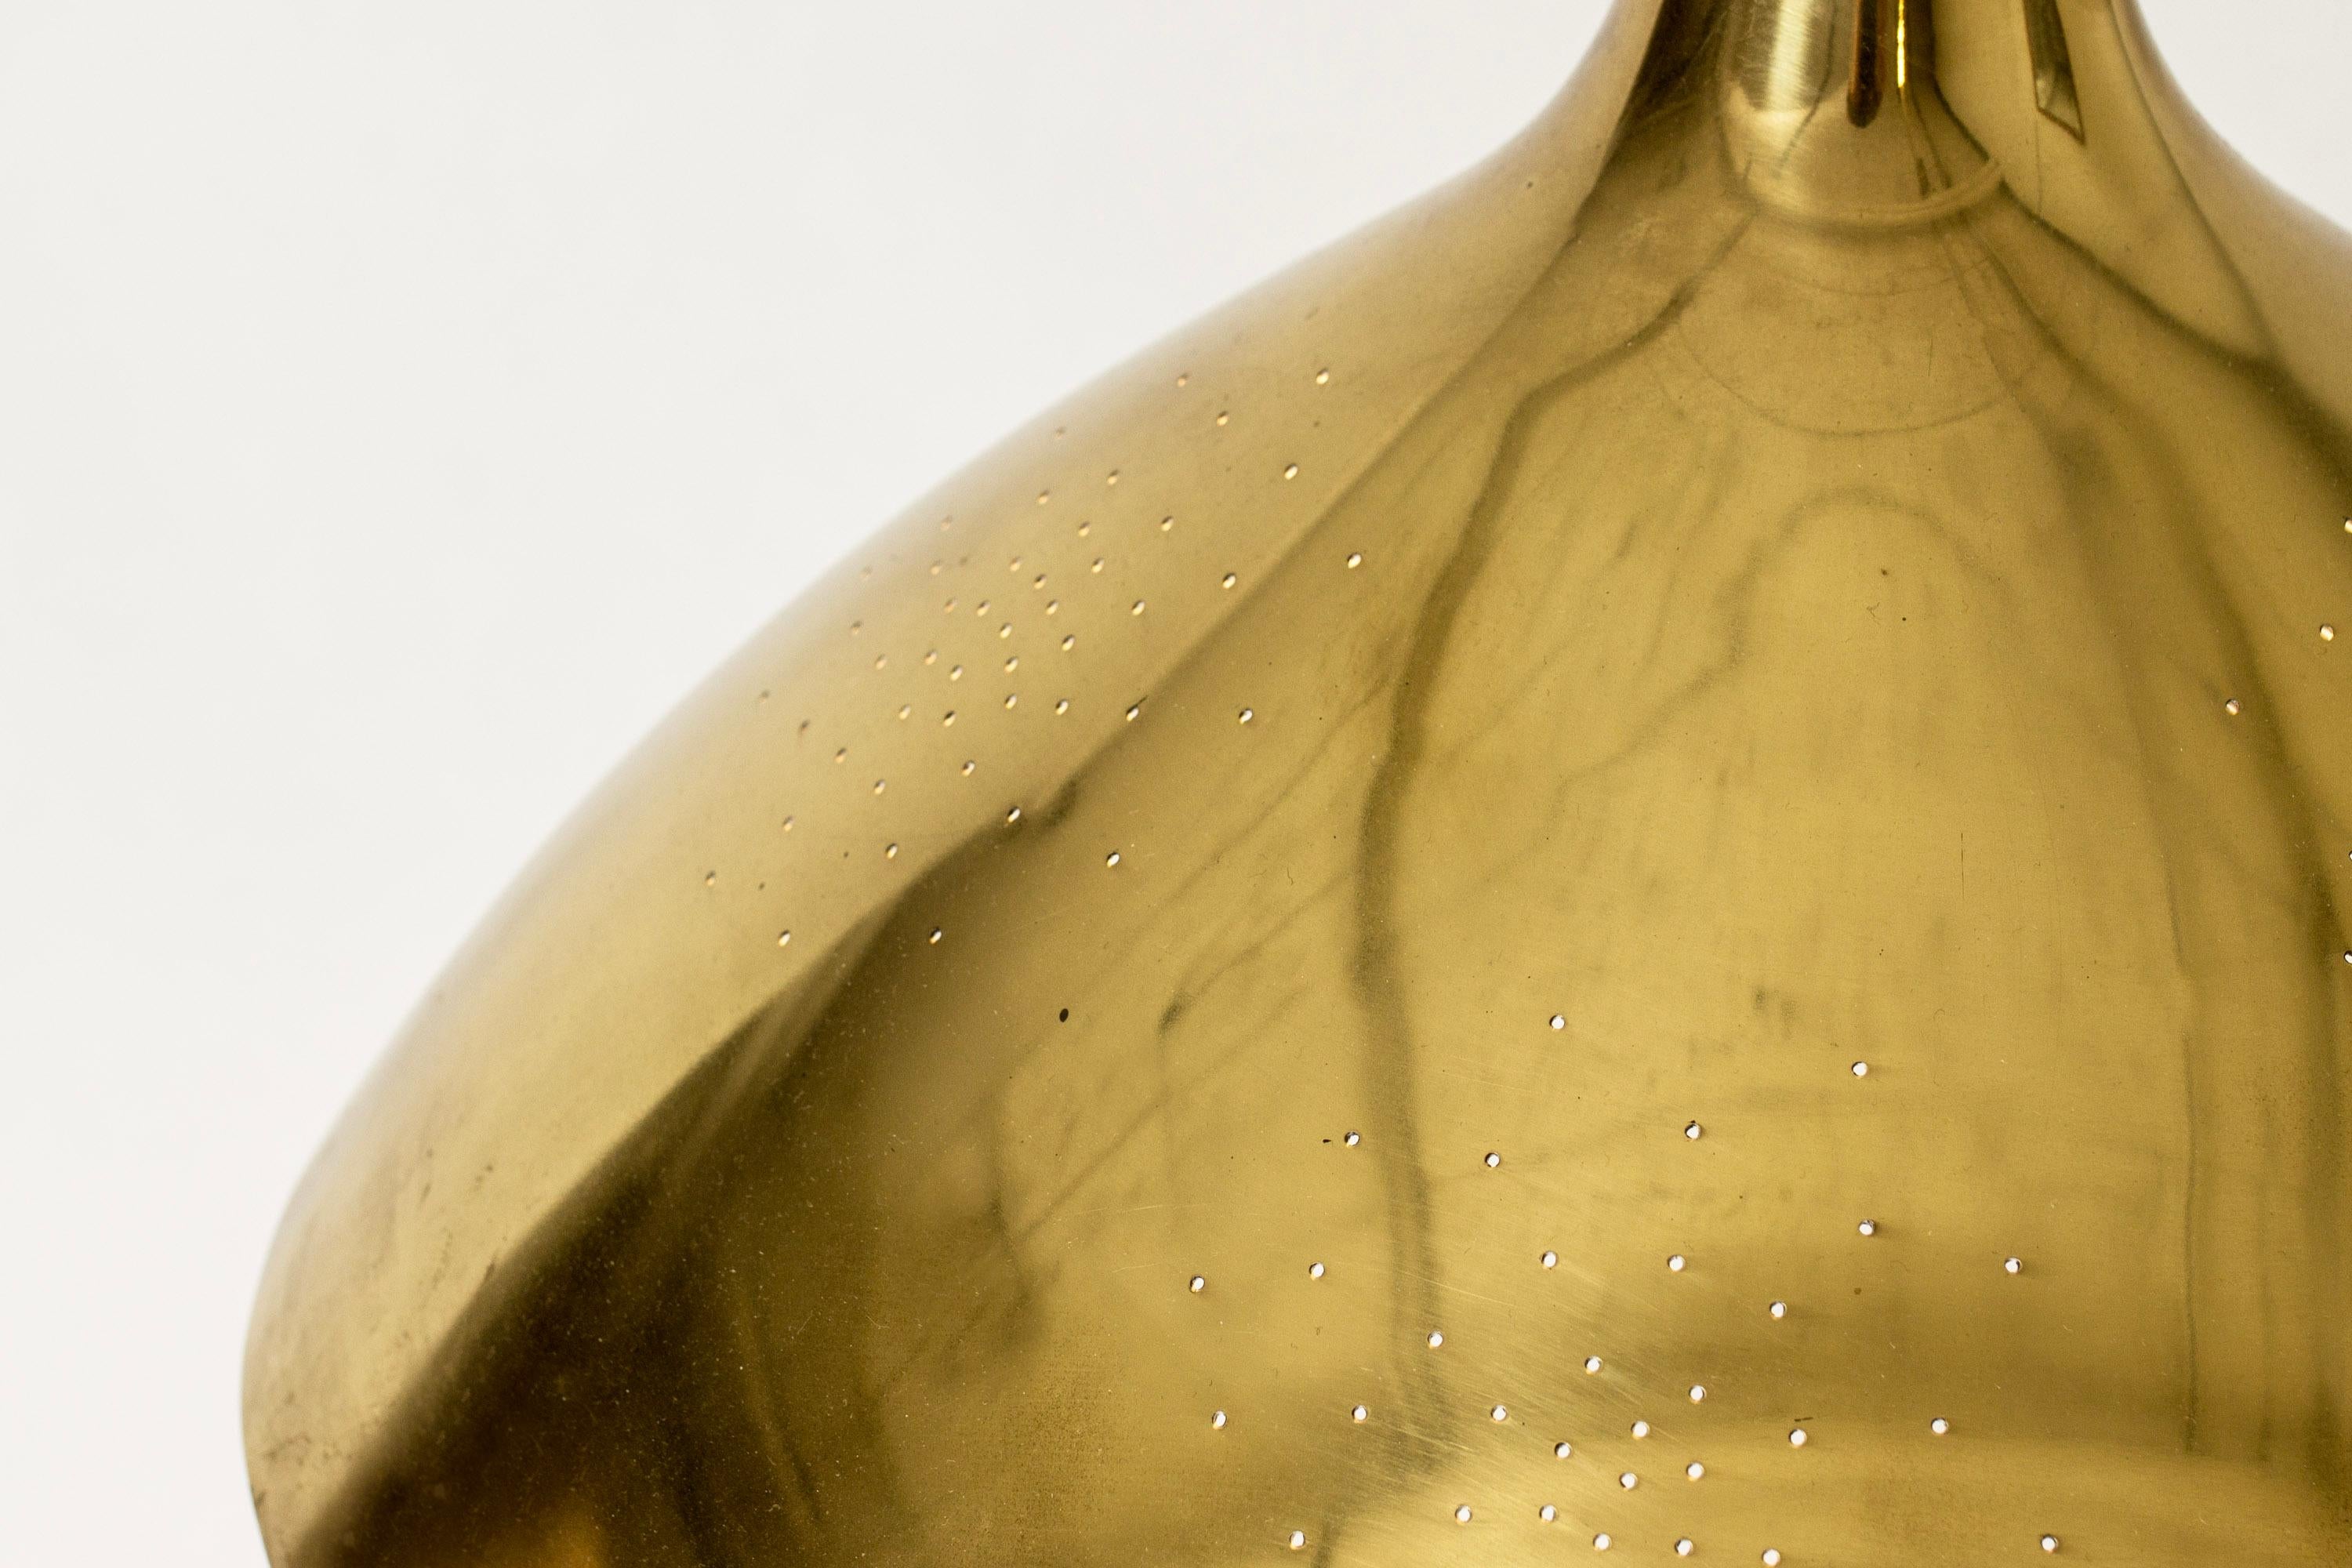 Finnish Midcentury Brass Pendant Lamp by Lisa Johansson-Pape, Orno, Finland, 1950s For Sale